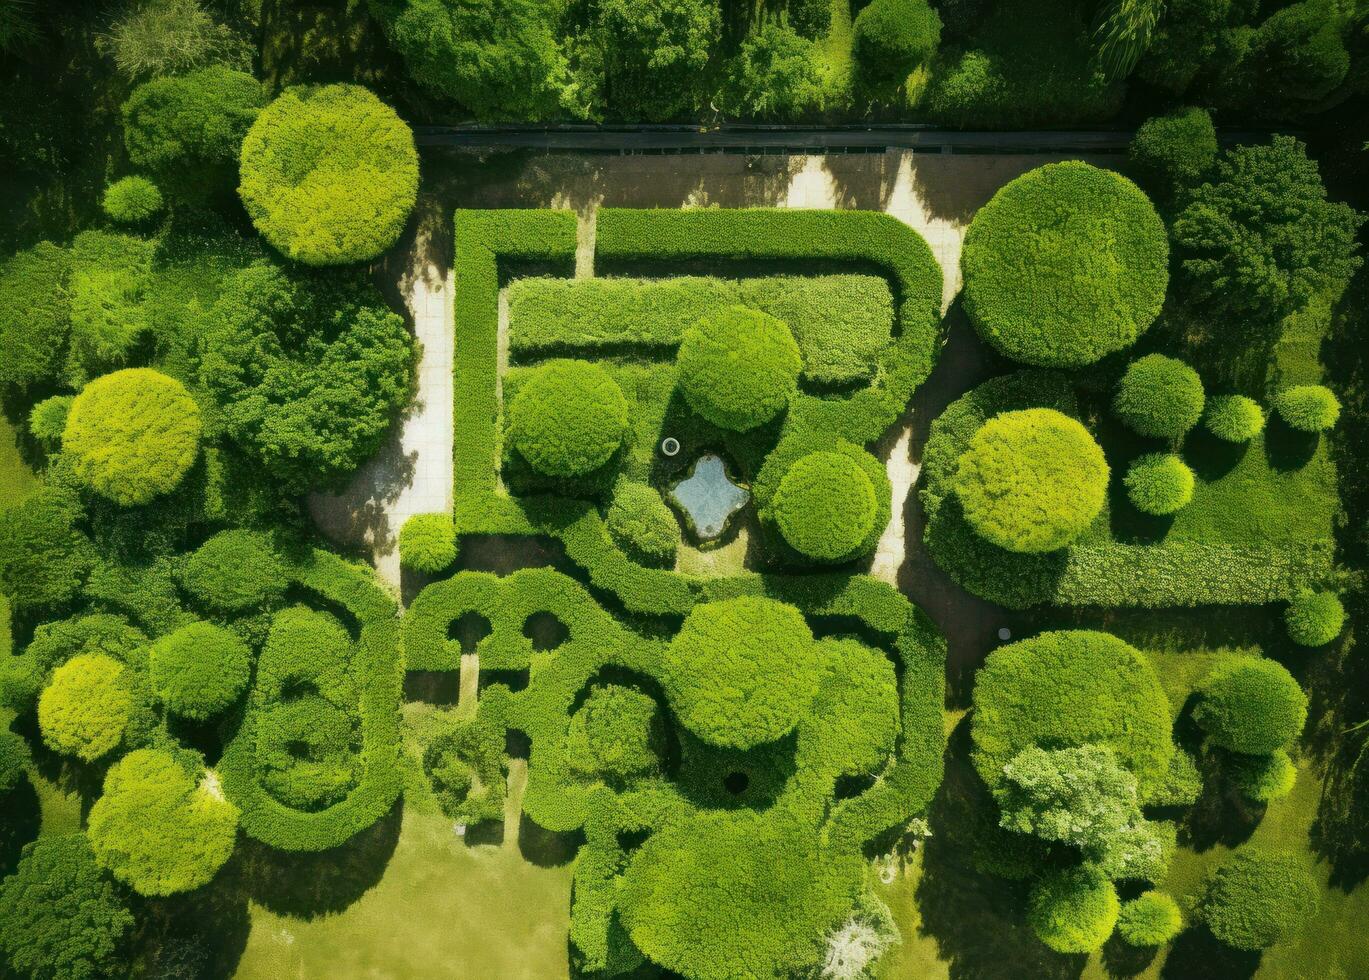 Aerial drone view from the top of a garden path photo